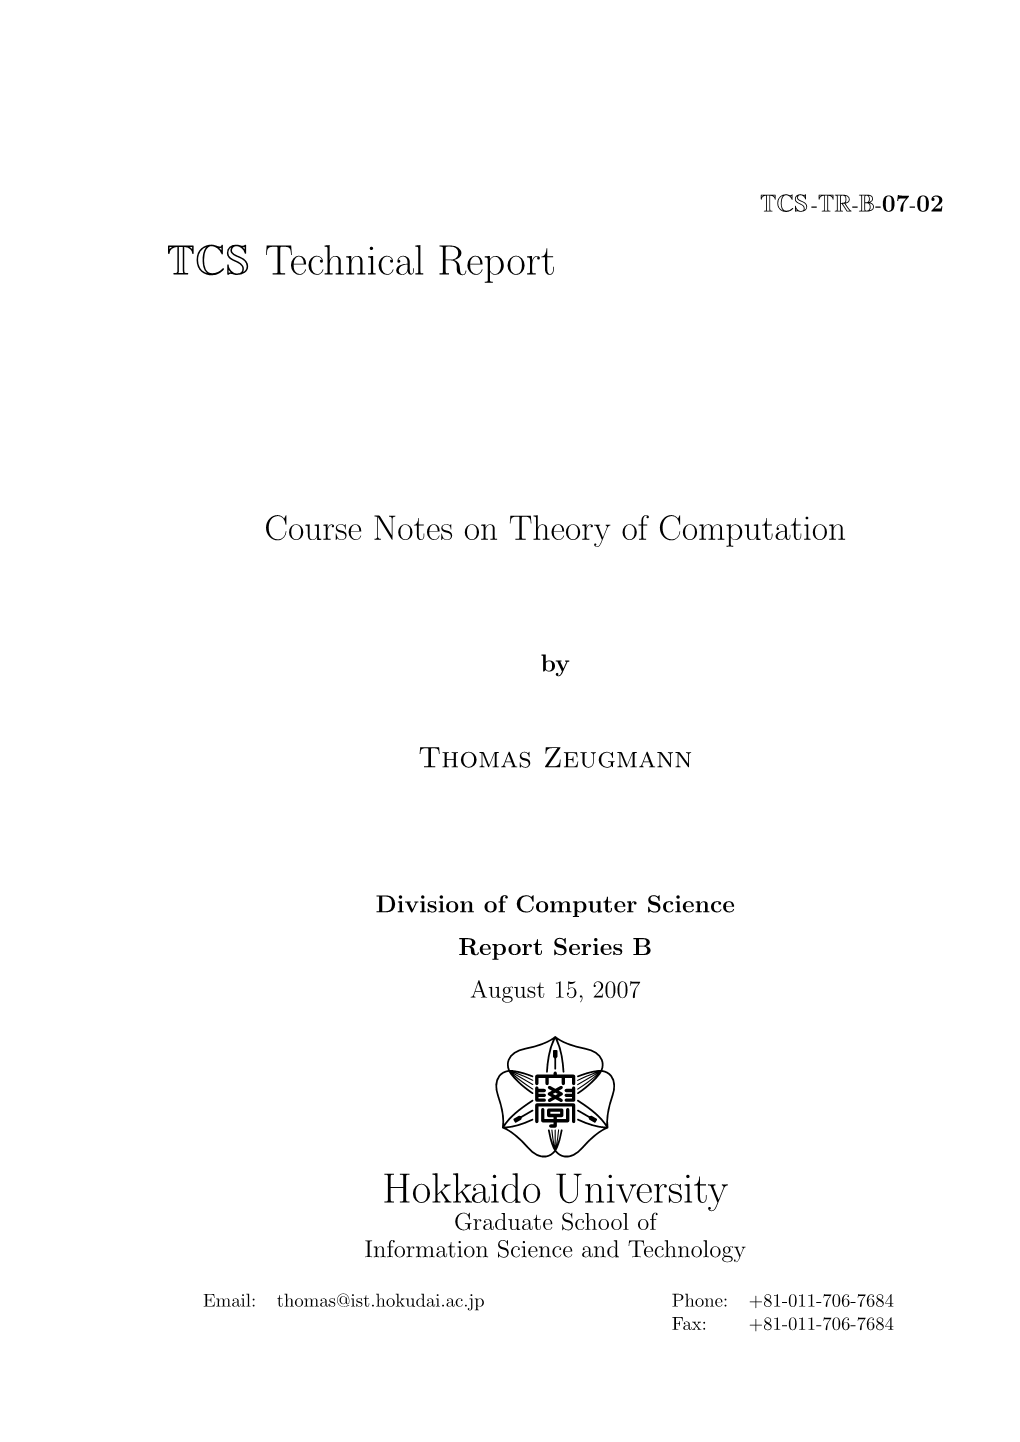 Course Notes on Theory of Computation